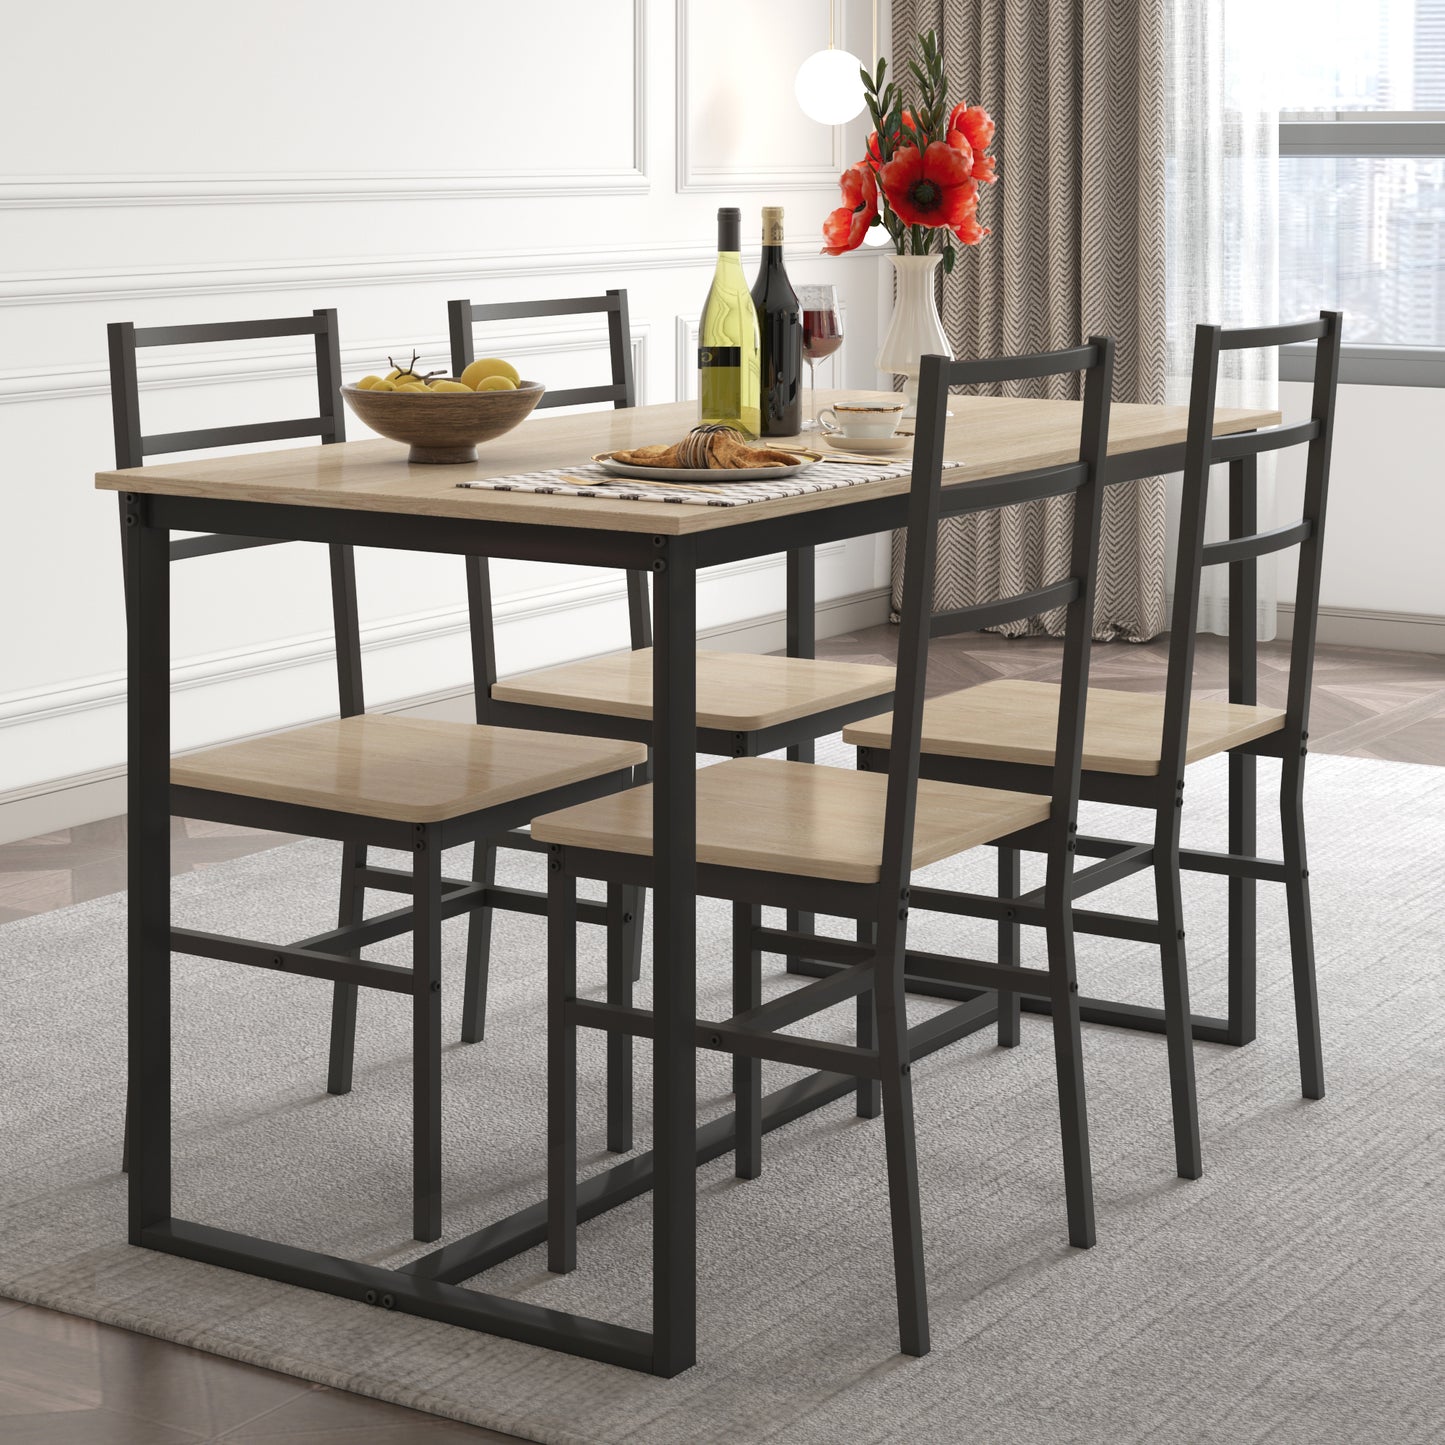 5 Piece Dining Set, Dining Table Set for 4, Modern Dining Room Table Set with 4 Chairs, Table and Chairs Set with Wooden Tabletop and Metal Frame, for Kitchen, Living Room, Restaurant, D6111